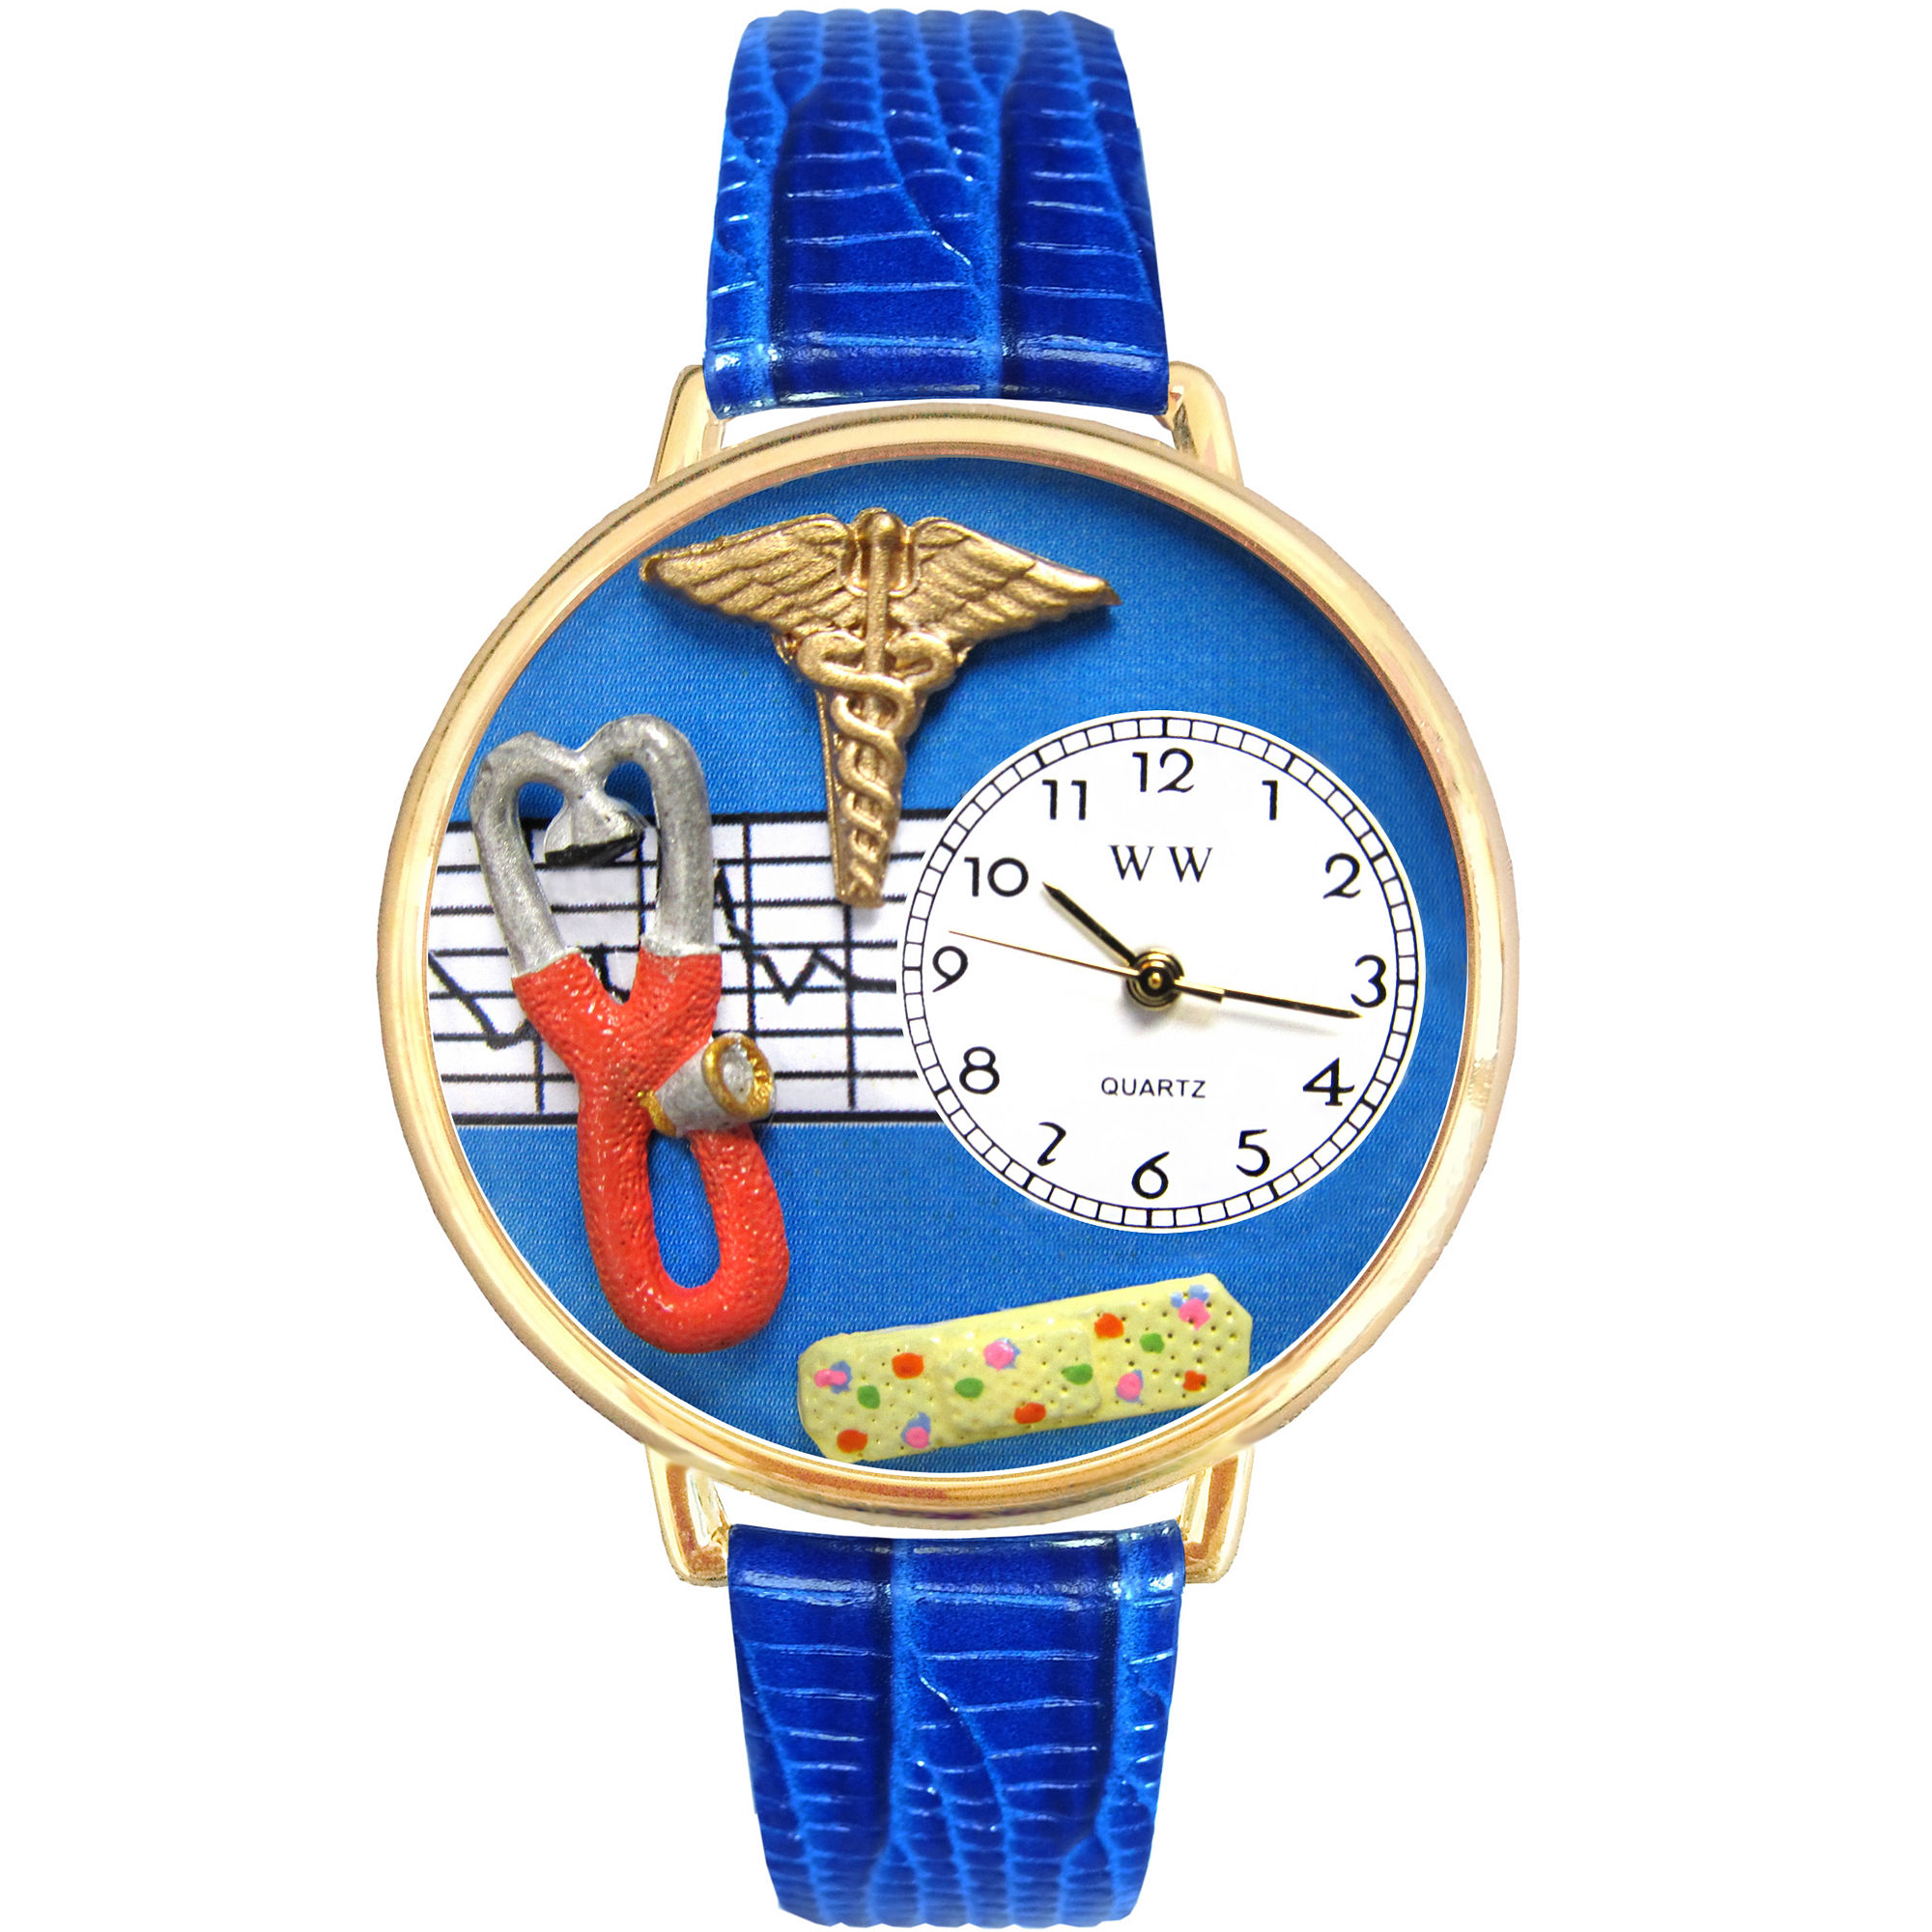 Whimsical Watches Personalized Nurse Womens Gold-Tone Bezel Blue Leather Strap Watch